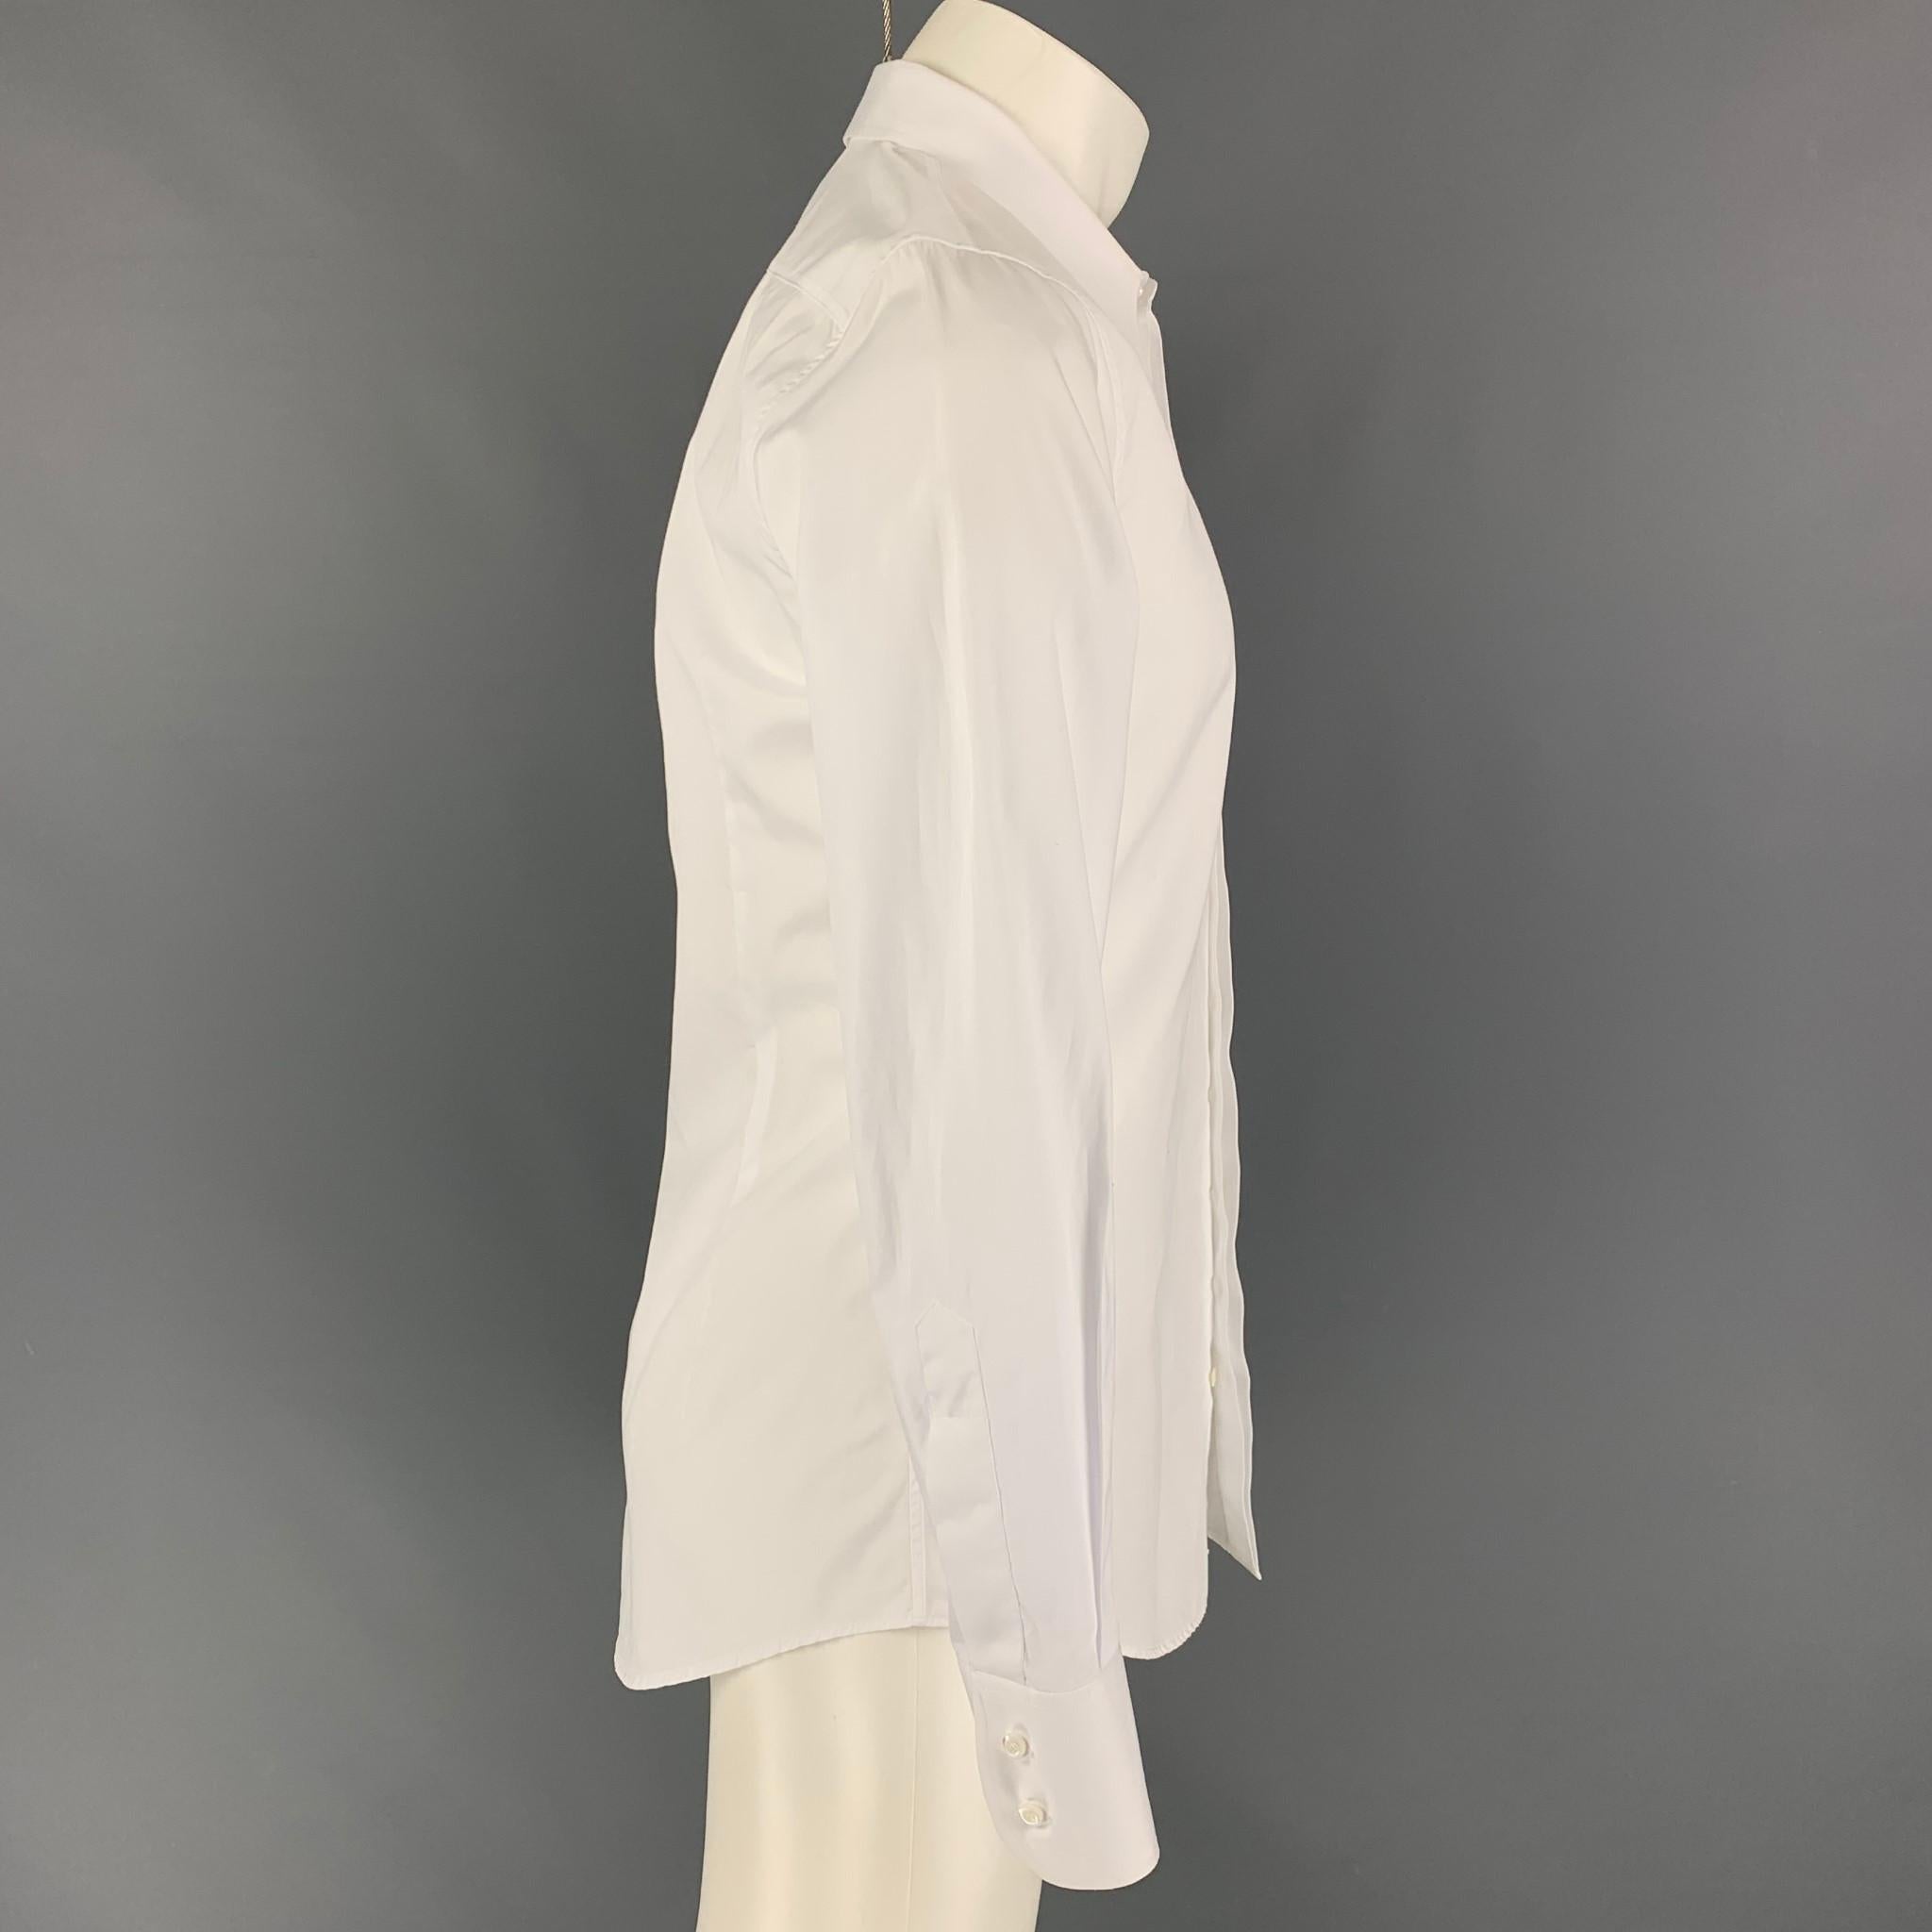 DSQUARED2 long sleeve shirt comes in a white cotton featuring a pointe collar, small logo detail, and a hidden placket closure. Made in Italy. 

Very Good Pre-Owned Condition.
Marked: 48

Measurements:

Shoulder: 17 in.
Chest: 40 in.
Sleeve: 26.5